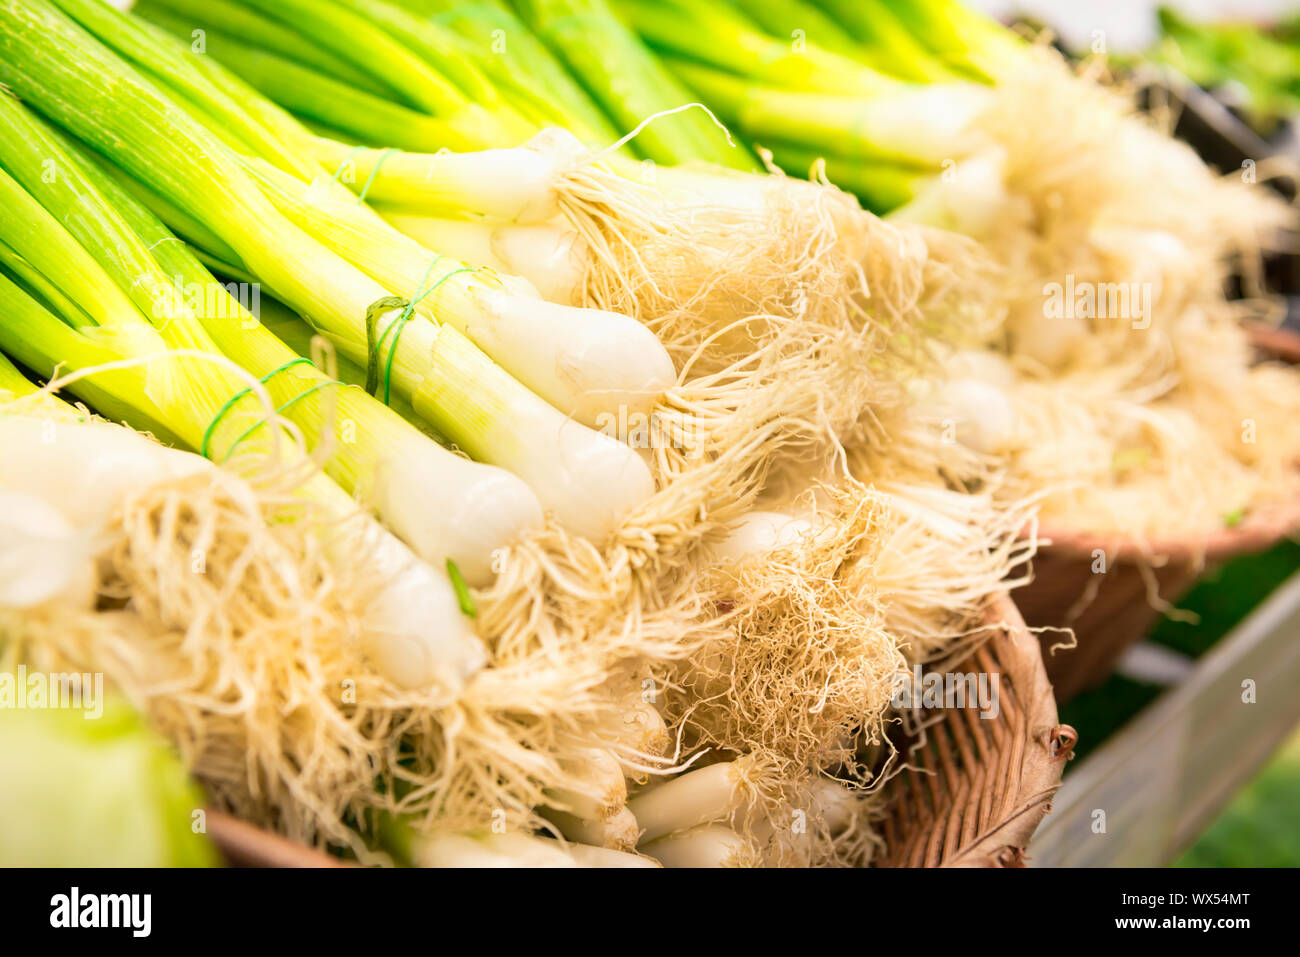 Bunches of green onion at market Stock Photo